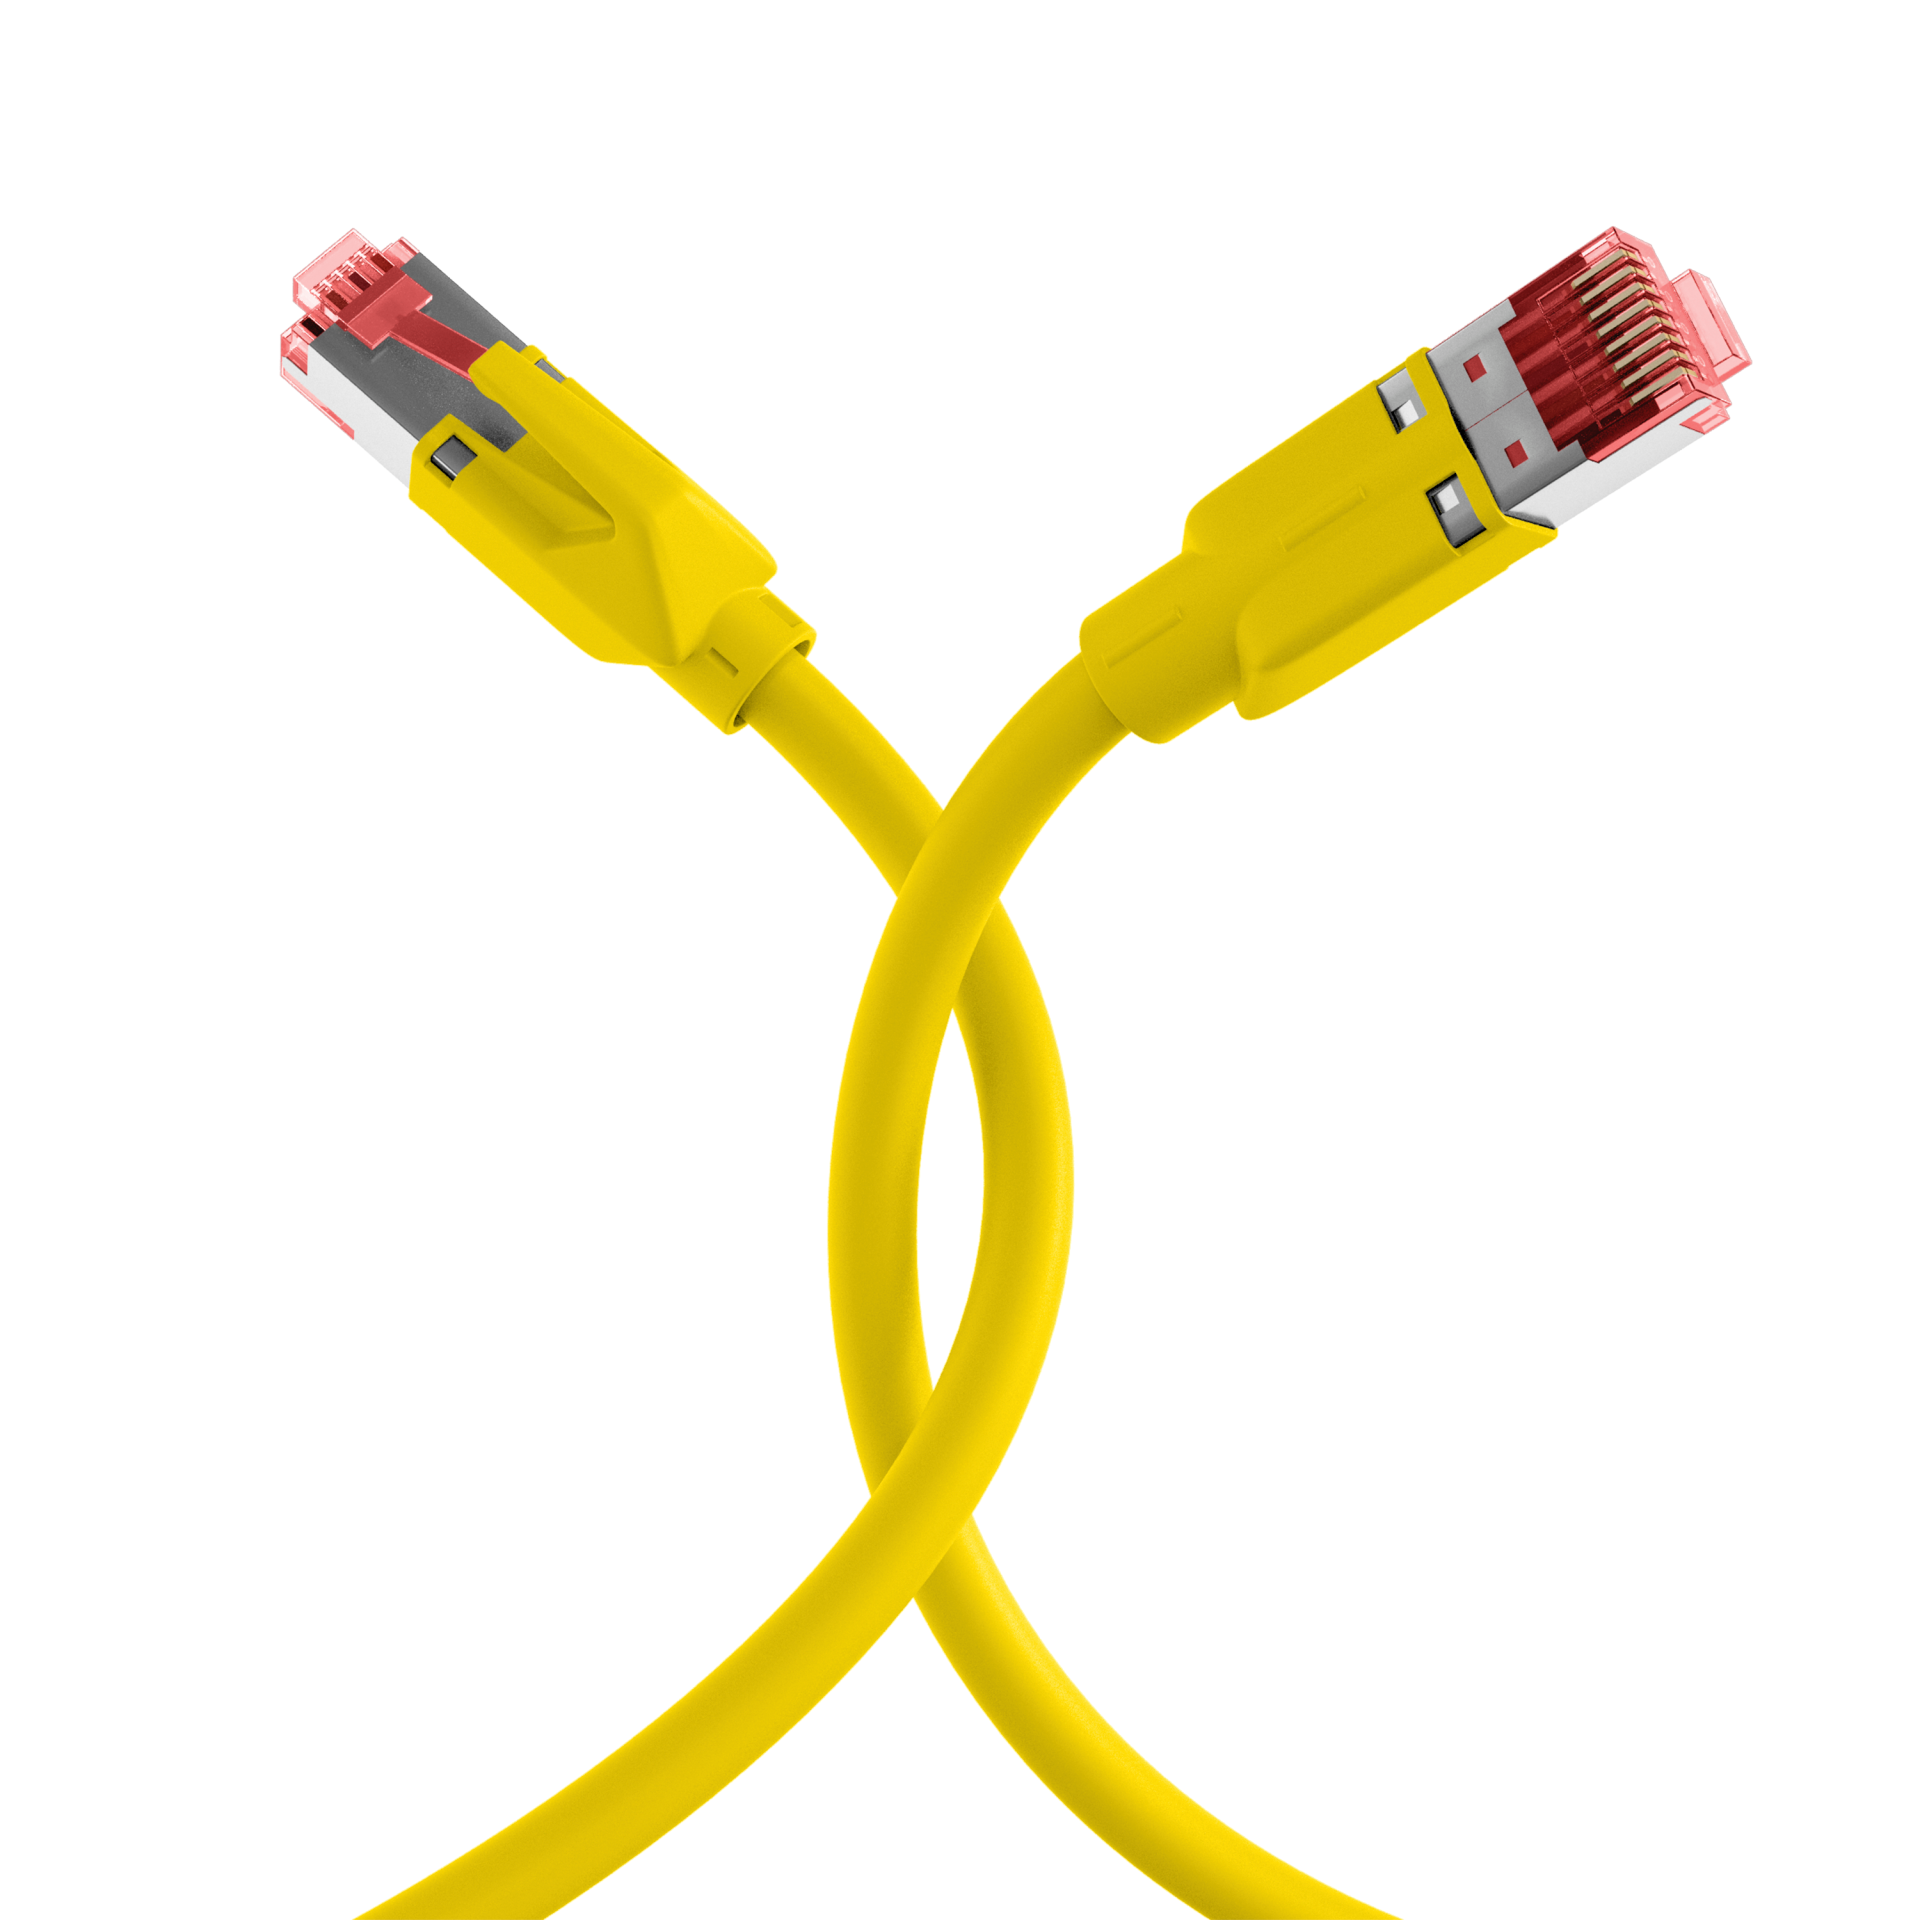 RJ45 Patch Cord Cat.5e S/UTP PUR TM21 for drag chains yellow 1,5m